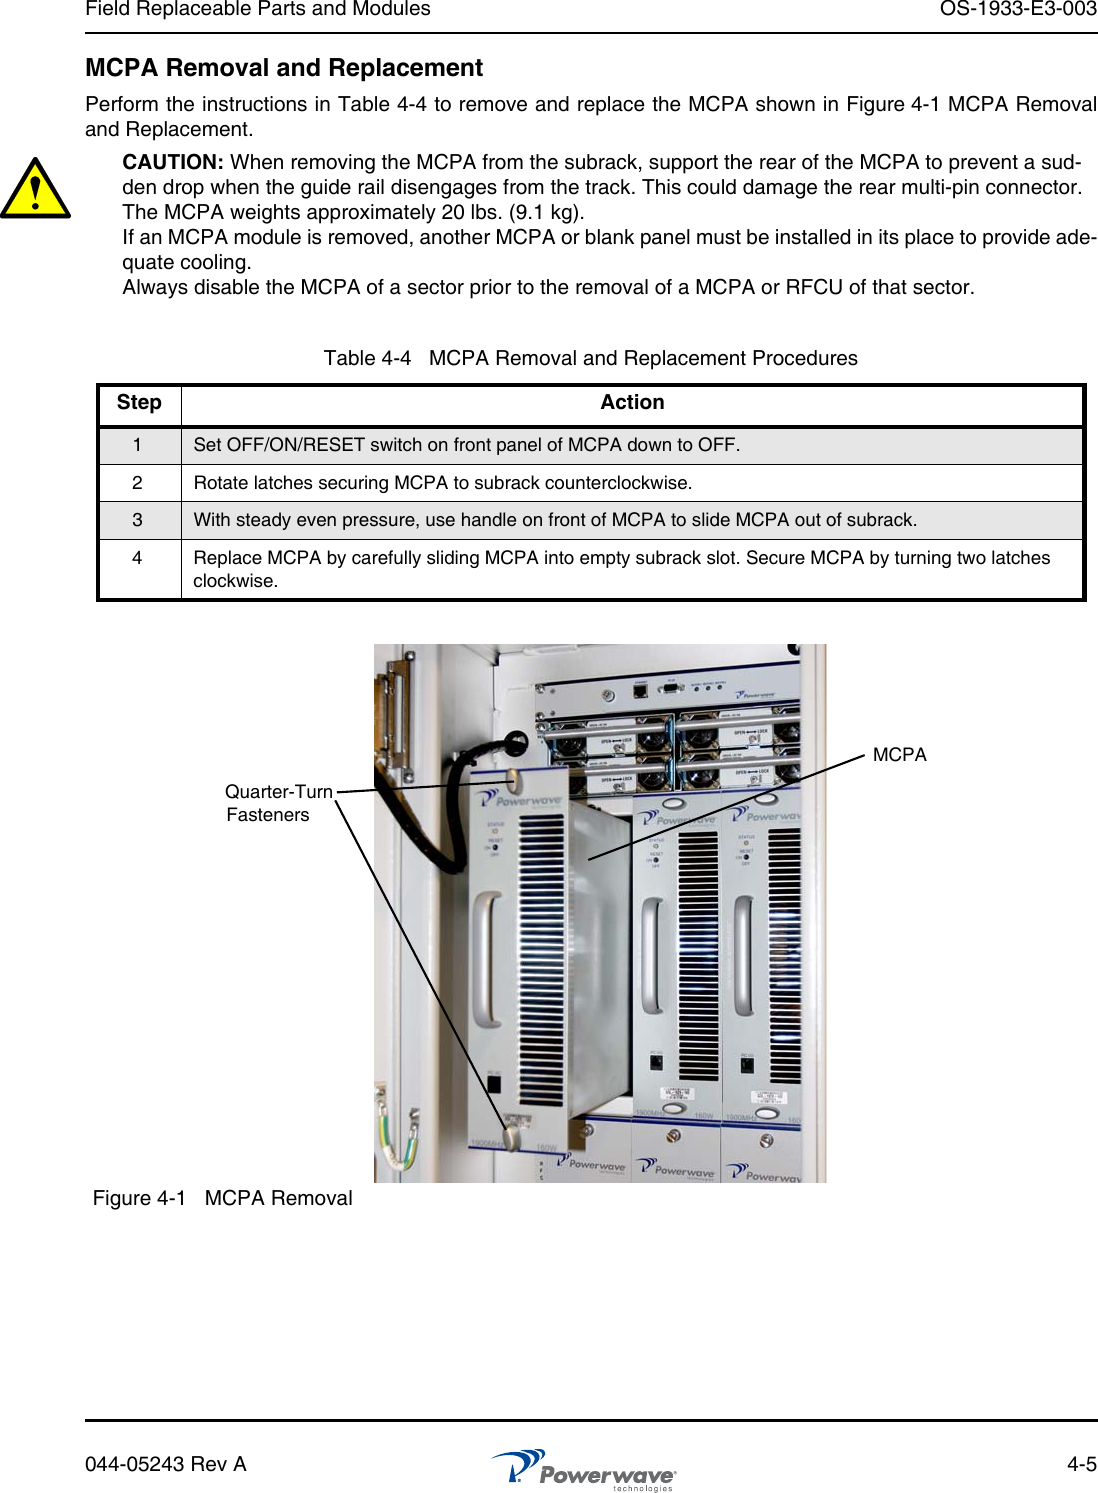 Field Replaceable Parts and Modules OS-1933-E3-003044-05243 Rev A 4-5MCPA Removal and ReplacementPerform the instructions in Table 4-4 to remove and replace the MCPA shown in Figure 4-1 MCPA Removaland Replacement.CAUTION: When removing the MCPA from the subrack, support the rear of the MCPA to prevent a sud-den drop when the guide rail disengages from the track. This could damage the rear multi-pin connector. The MCPA weights approximately 20 lbs. (9.1 kg).If an MCPA module is removed, another MCPA or blank panel must be installed in its place to provide ade-quate cooling.Always disable the MCPA of a sector prior to the removal of a MCPA or RFCU of that sector.Table 4-4   MCPA Removal and Replacement ProceduresStep Action1Set OFF/ON/RESET switch on front panel of MCPA down to OFF. 2 Rotate latches securing MCPA to subrack counterclockwise.3With steady even pressure, use handle on front of MCPA to slide MCPA out of subrack. 4 Replace MCPA by carefully sliding MCPA into empty subrack slot. Secure MCPA by turning two latches clockwise.Figure 4-1   MCPA Removal MCPAQuarter-TurnFasteners